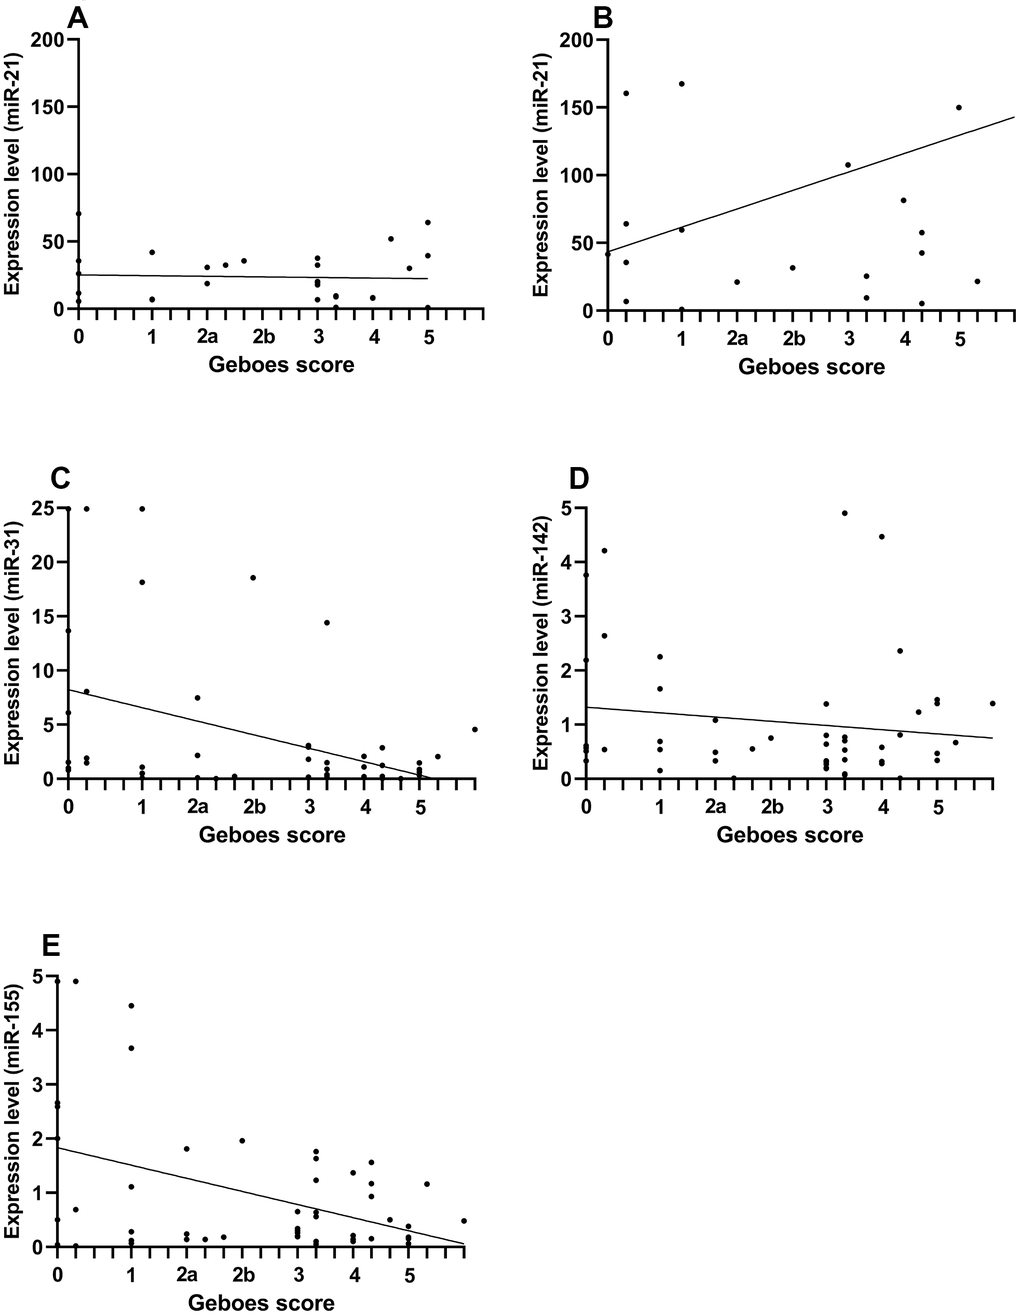 Comparison of miRNA expression levels and Geboes score in pediatric and adult patients with ulcerative colitis. The correlation is presented by Spearman’s rho and compares expression levels of miRNA (assessed by RT-qPCR) and Geboes score from the rectal mucosa. Because the miR-21 expression was increased in adult patient, pediatric and adult patients are presented separately for the comparison of miR-21. (A) pediatric miR-21 (rho=-0.04, p=0.8). (B) adult miR-21 (rho=0.19, p=0.37). (C) miR-31 (rho=-0.29, p=0.03). (D) miR-142 (rho=-0.04, p=0.8). (E) miR-155 (rho=-0.21, p=0.15).